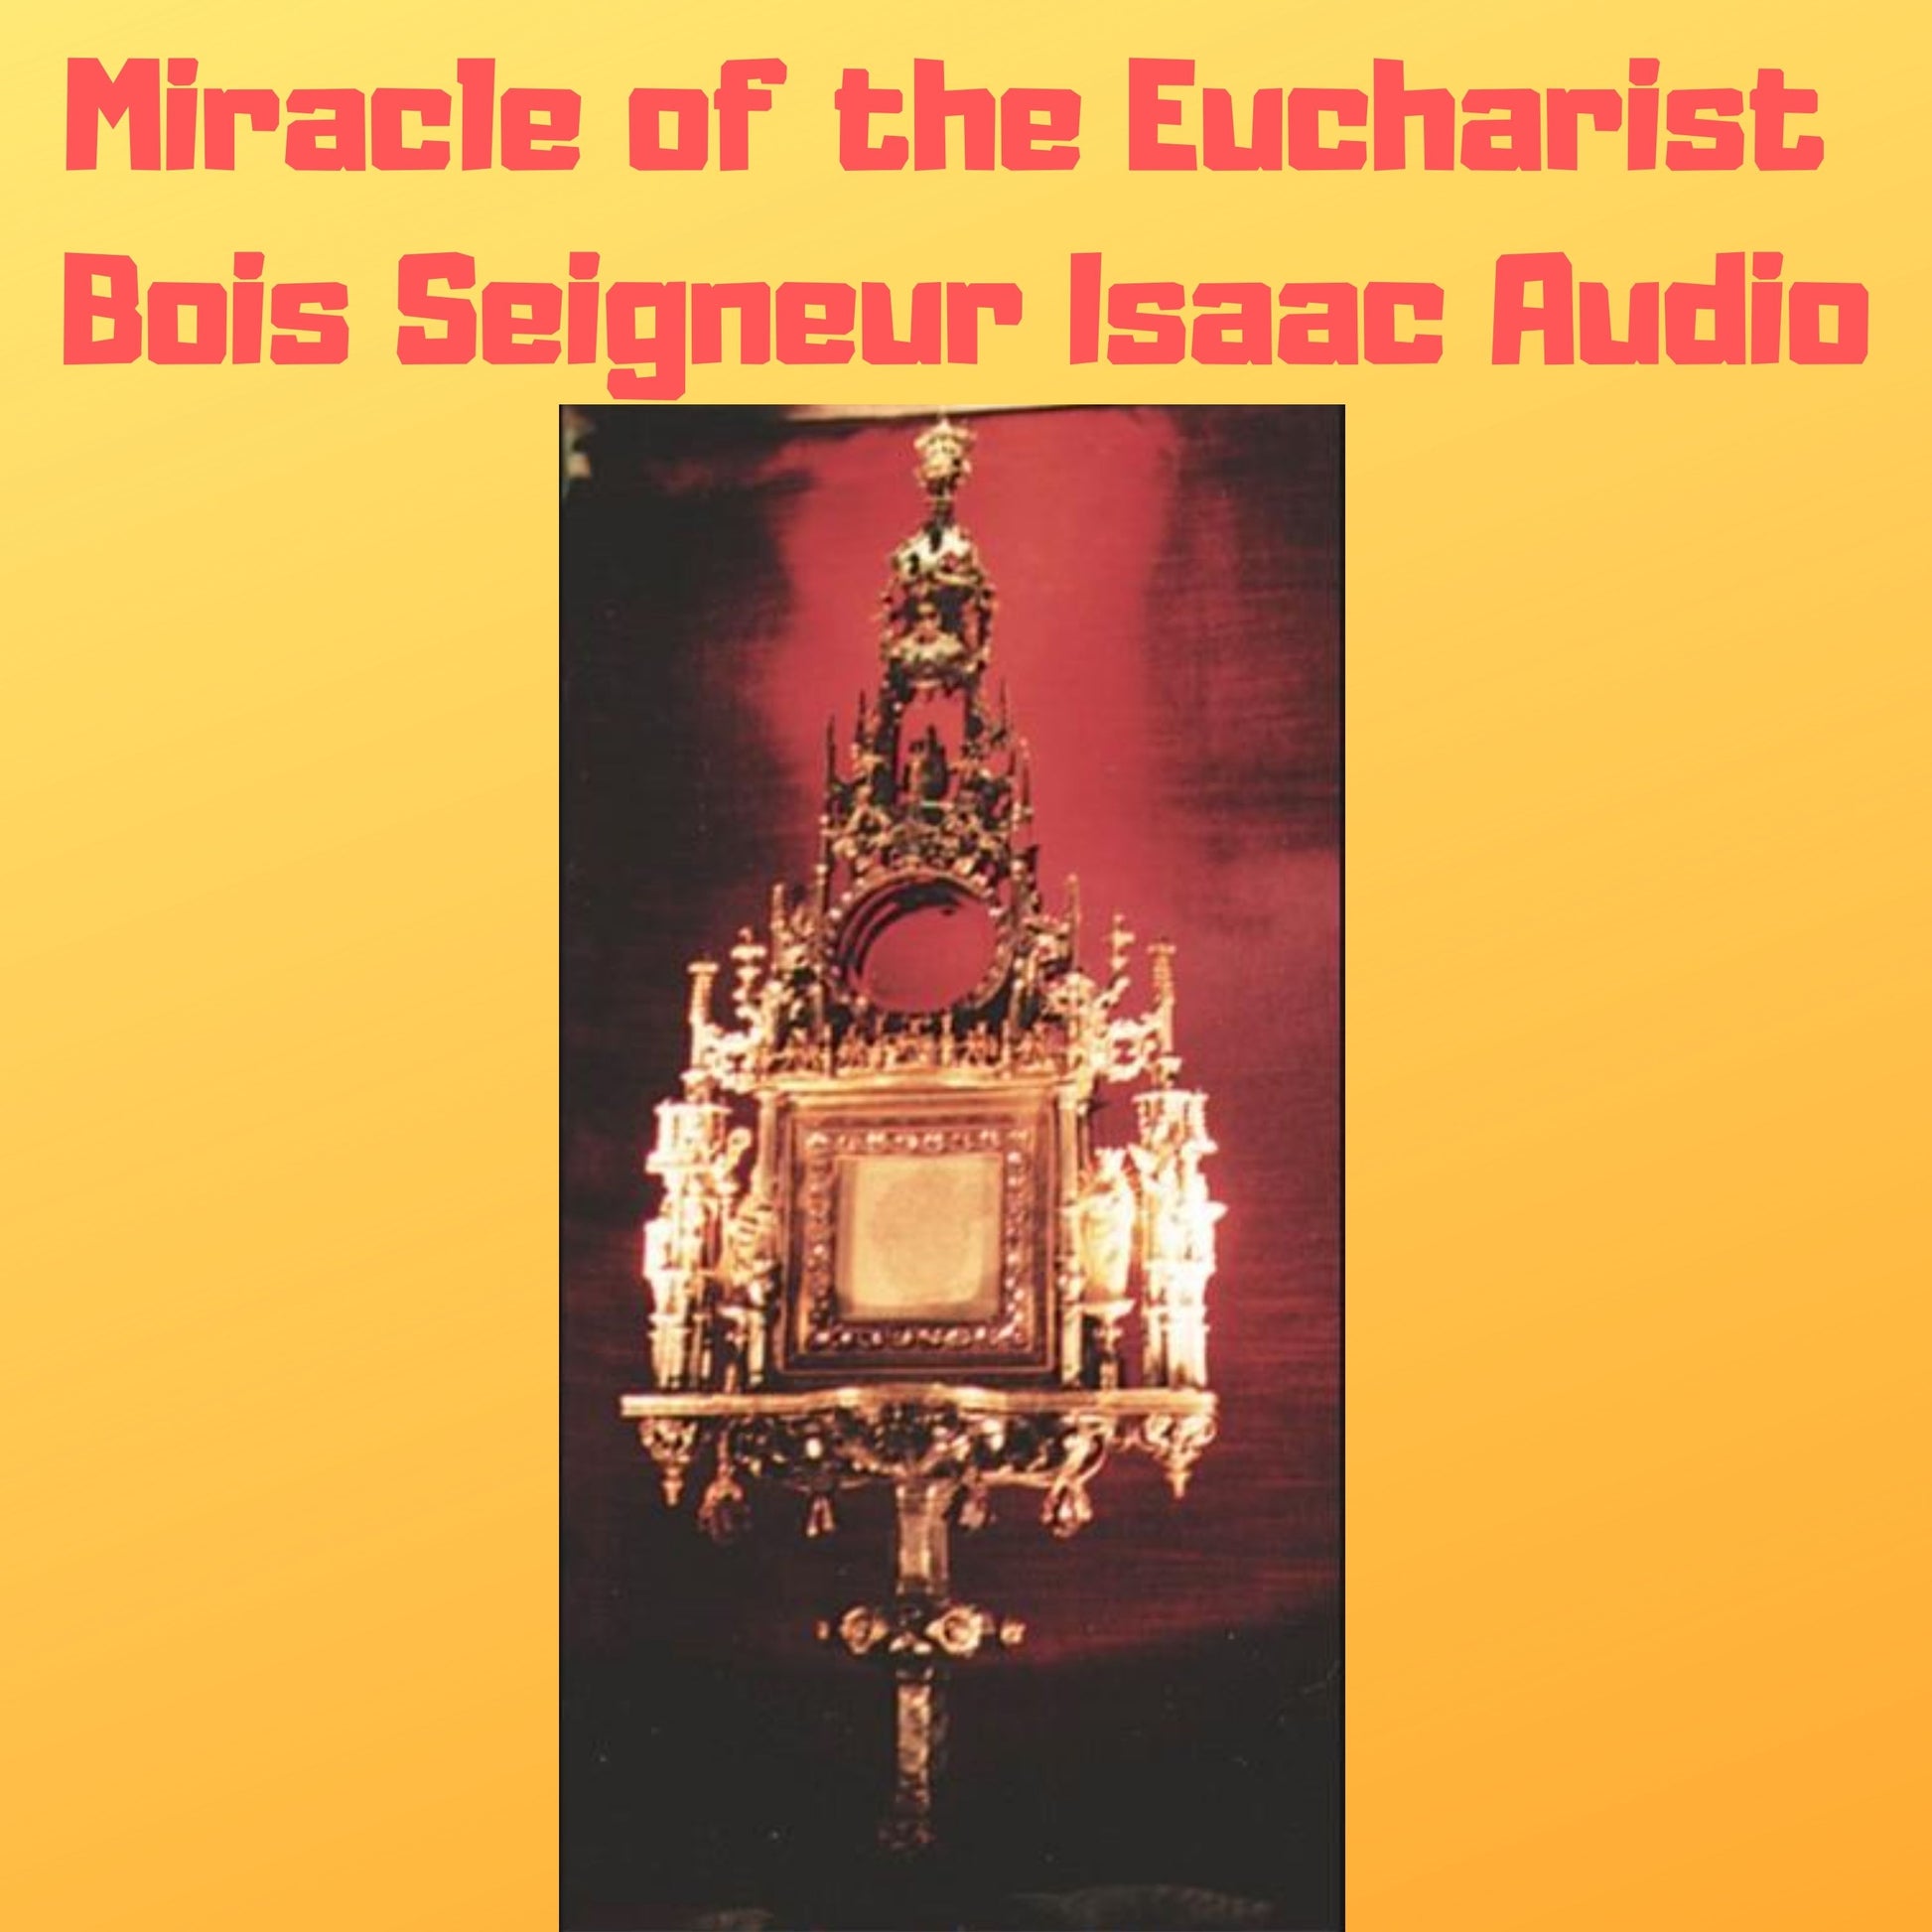 Miracle of the Eucharist of Bois Seigneur Isaac, Belgium -1405 Audiobook - Bob and Penny Lord